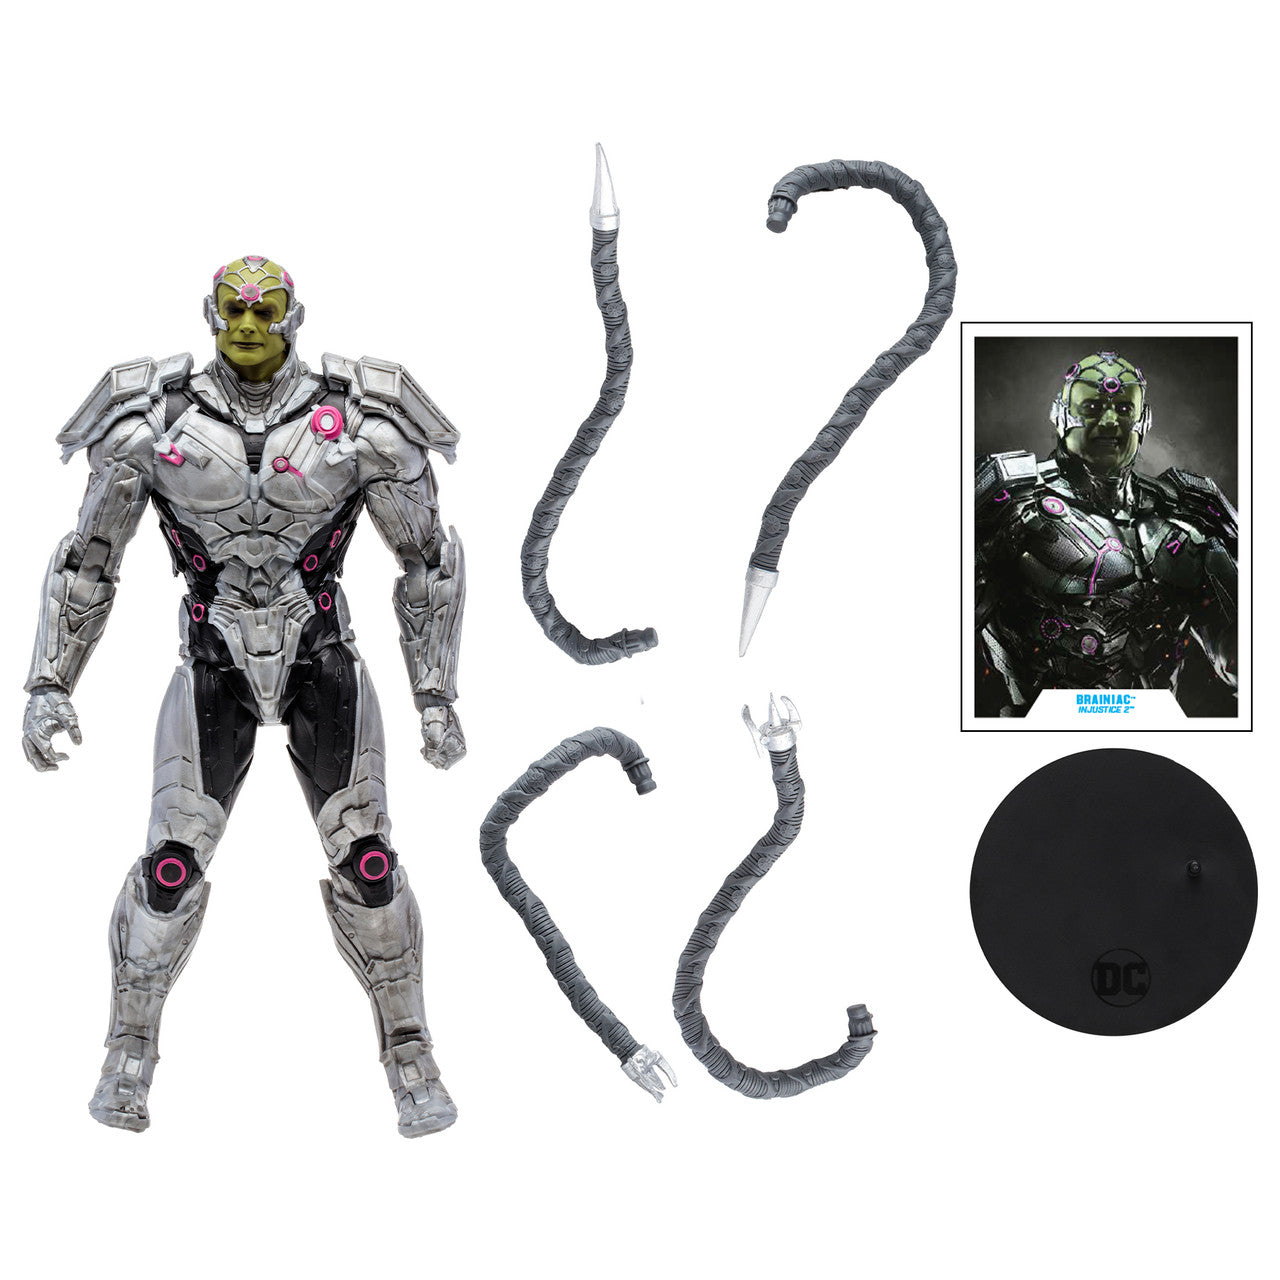 DC Gaming Injustice 2 - Wave 10 - Brainiac Action Figure Toy with accessories - Heretoserveyou